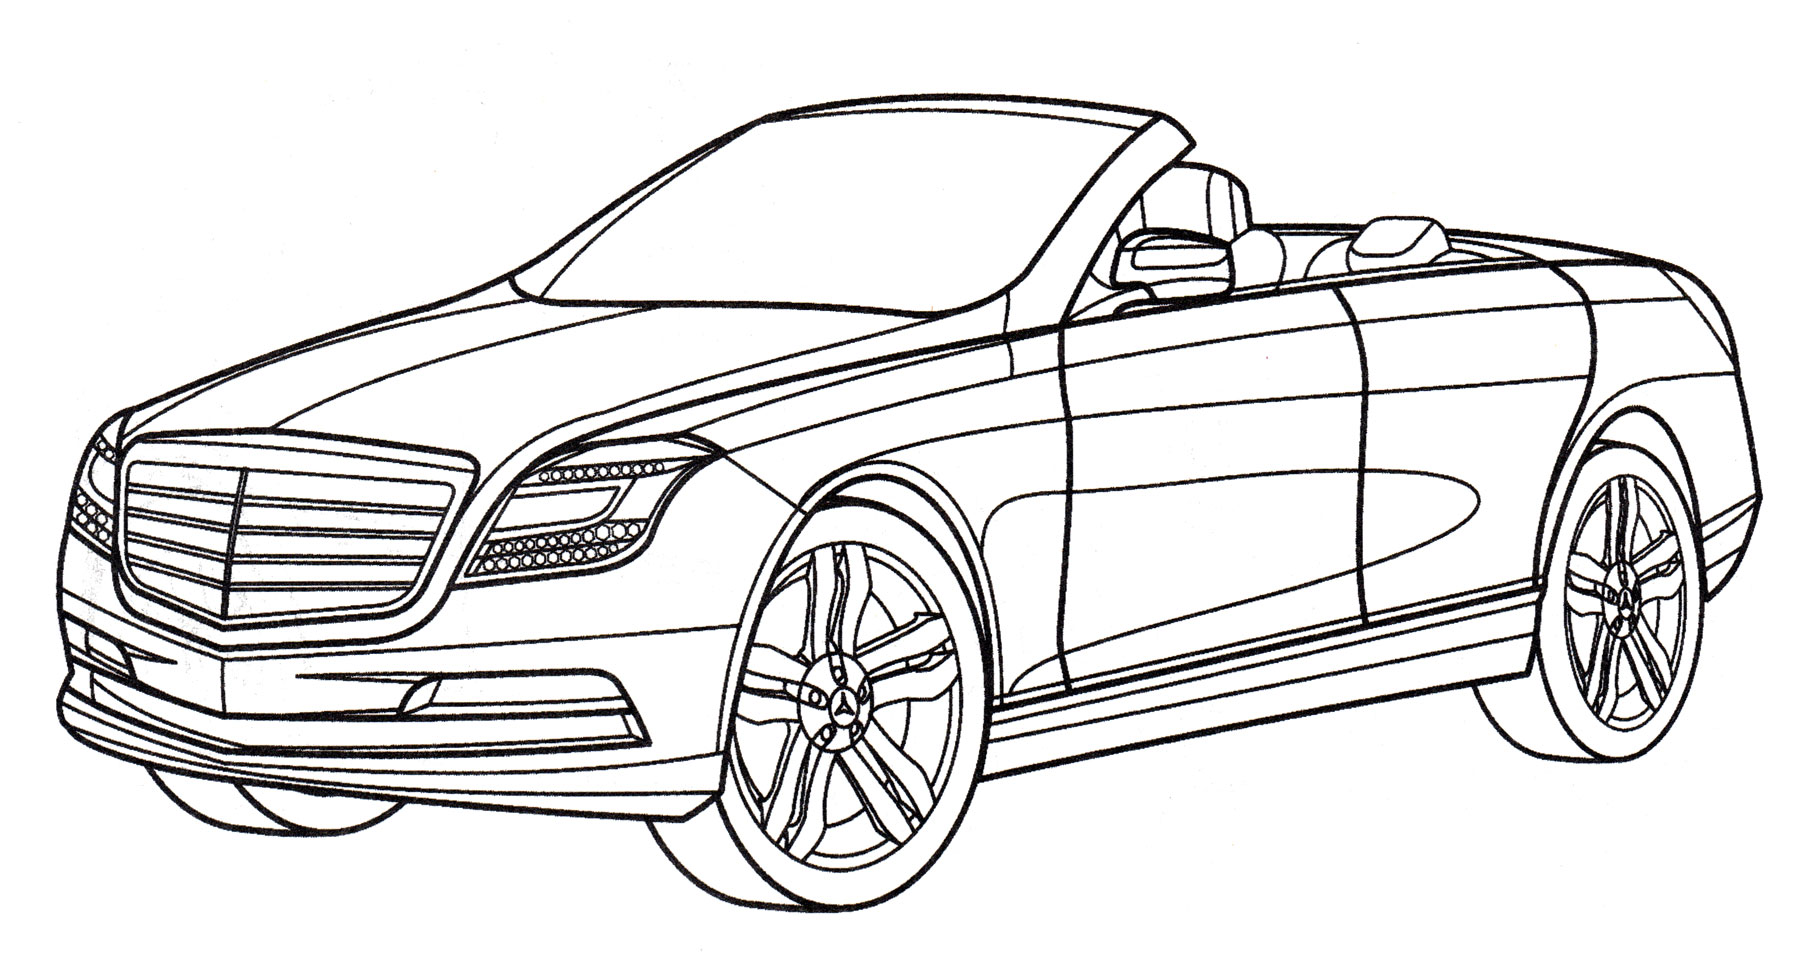 Mercedes Amg Gtr Coloring Pages